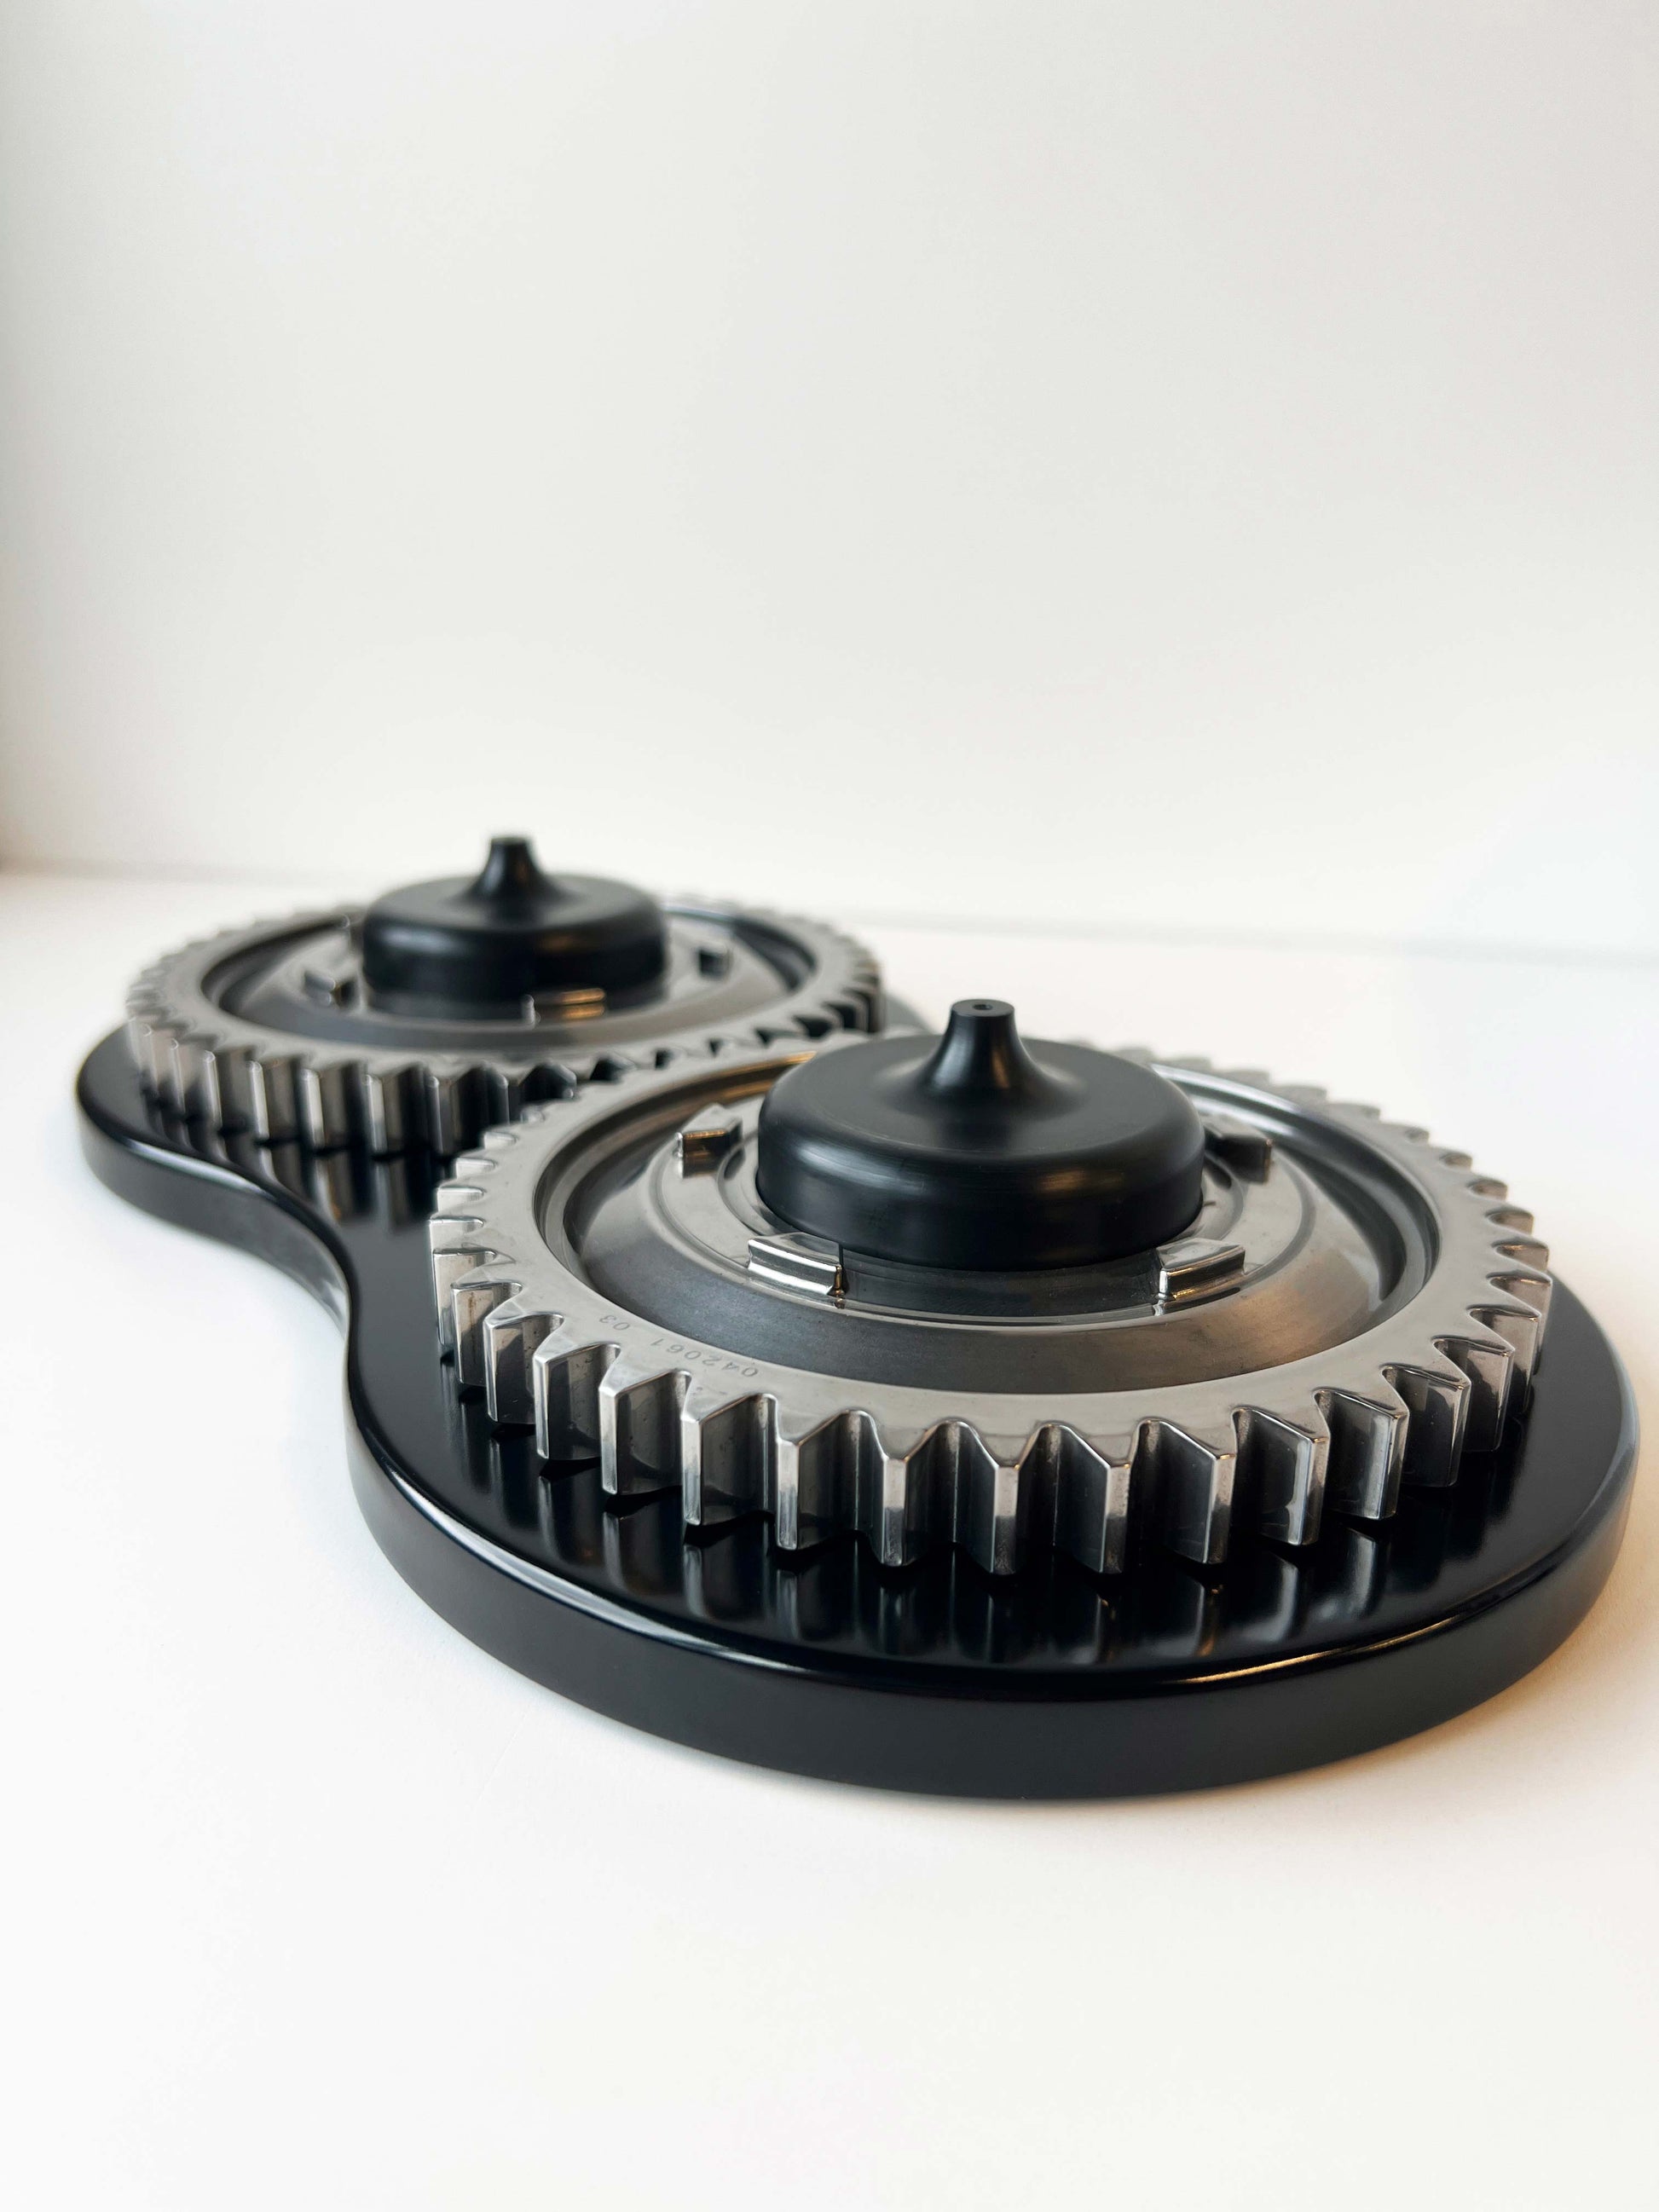 Two F1 Gears on black wooden base